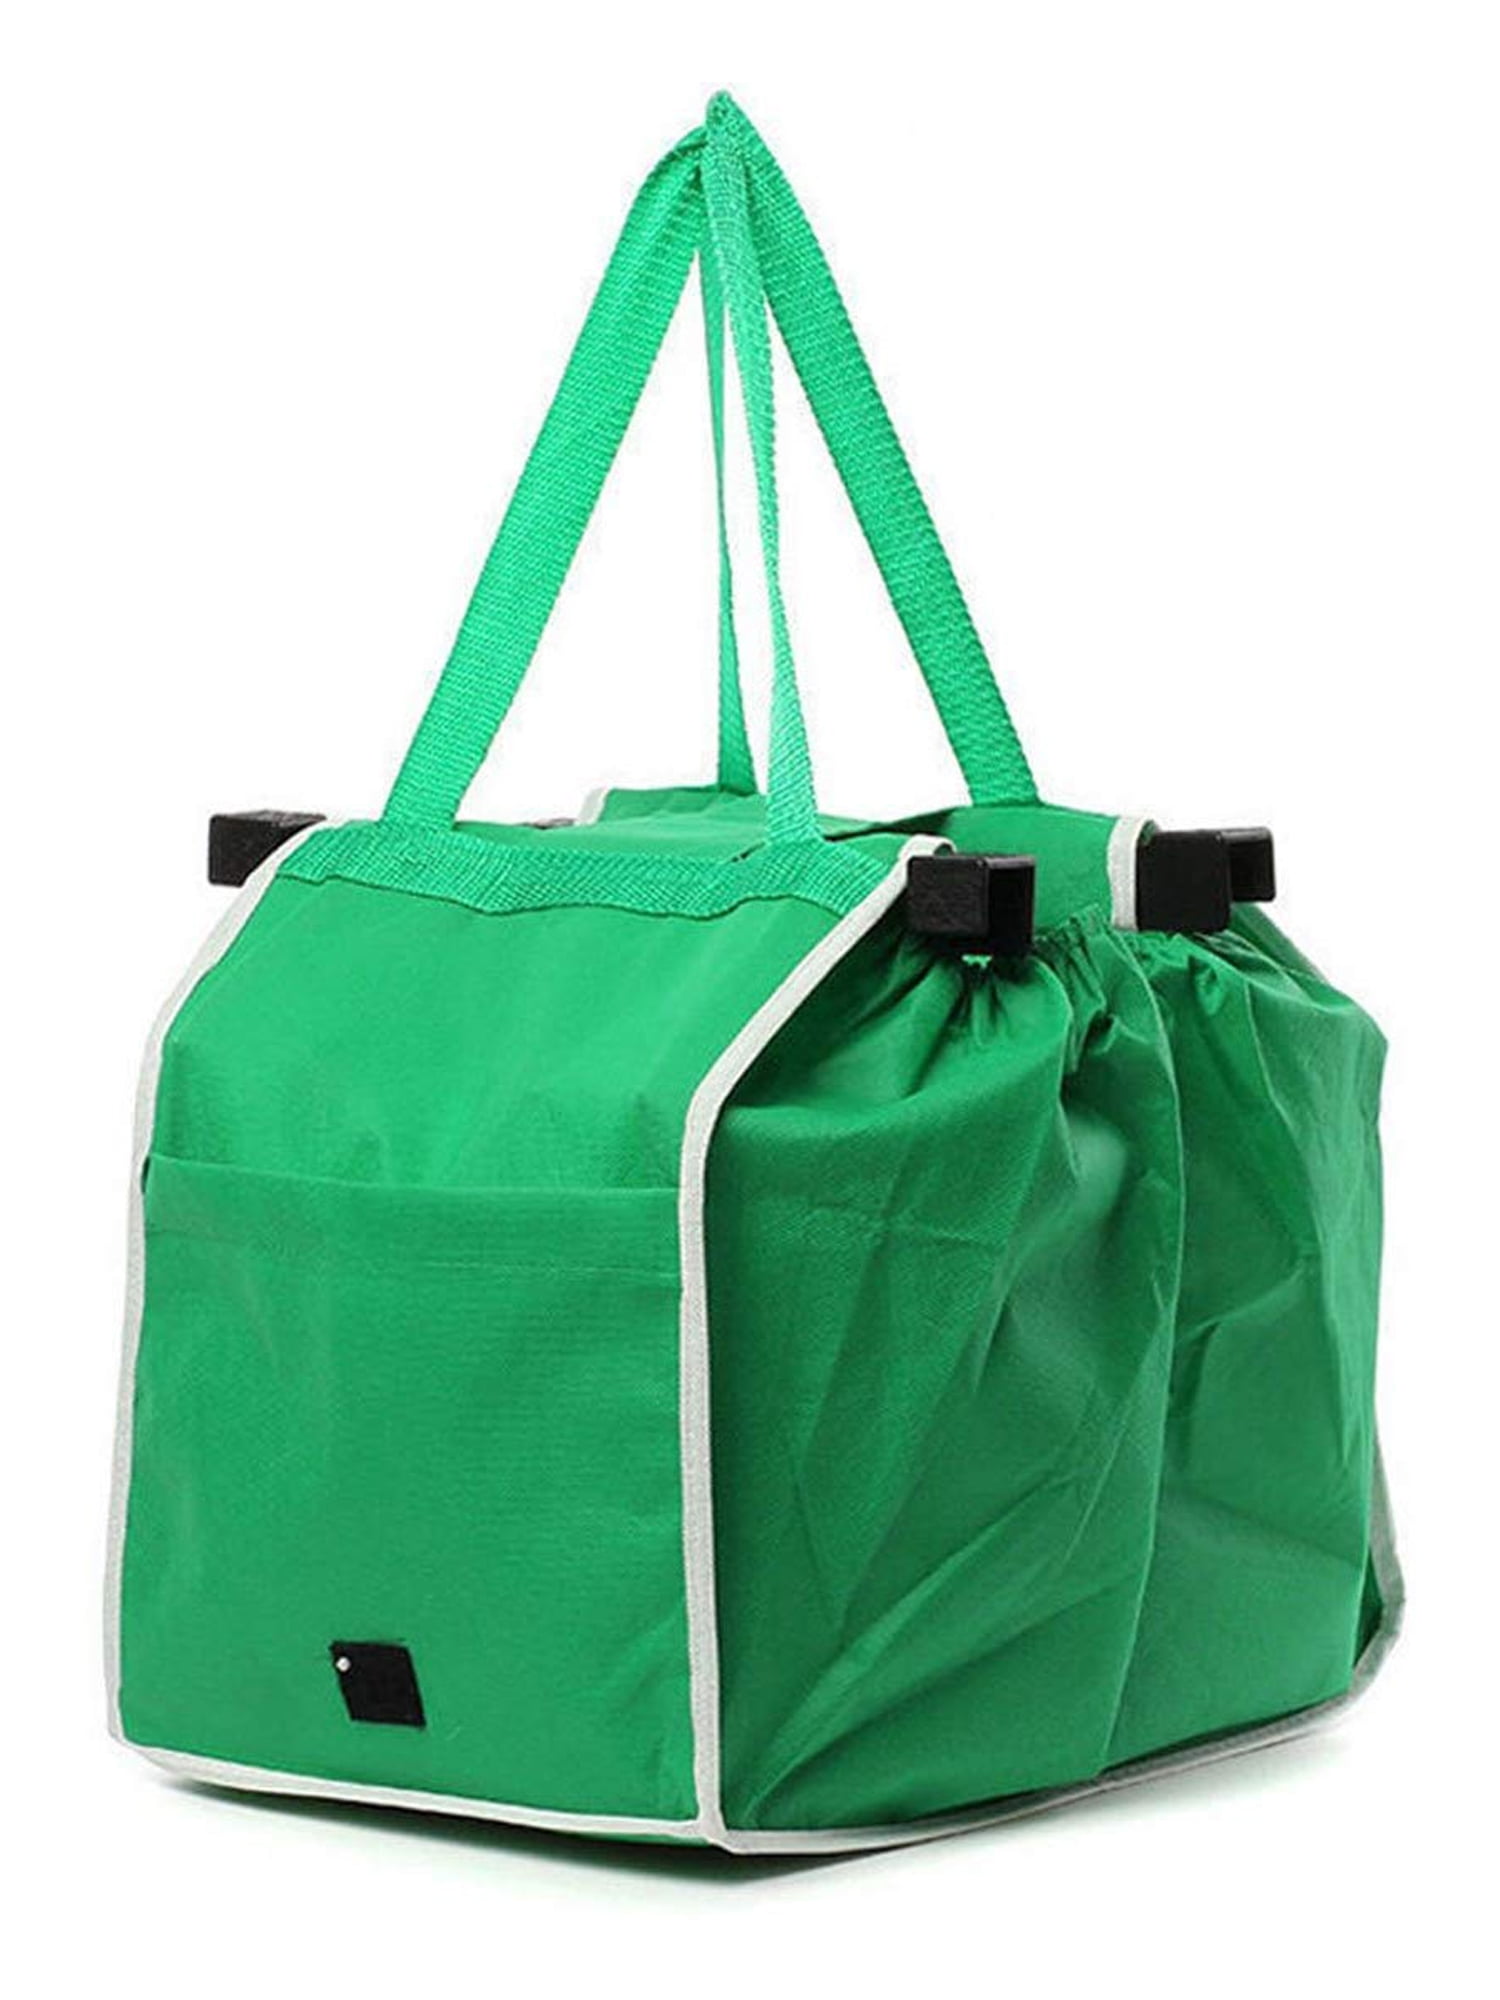 Foldable Grocery Grab Shopping Bag Eco-friendly Reusable Supermarket Tote Bags 